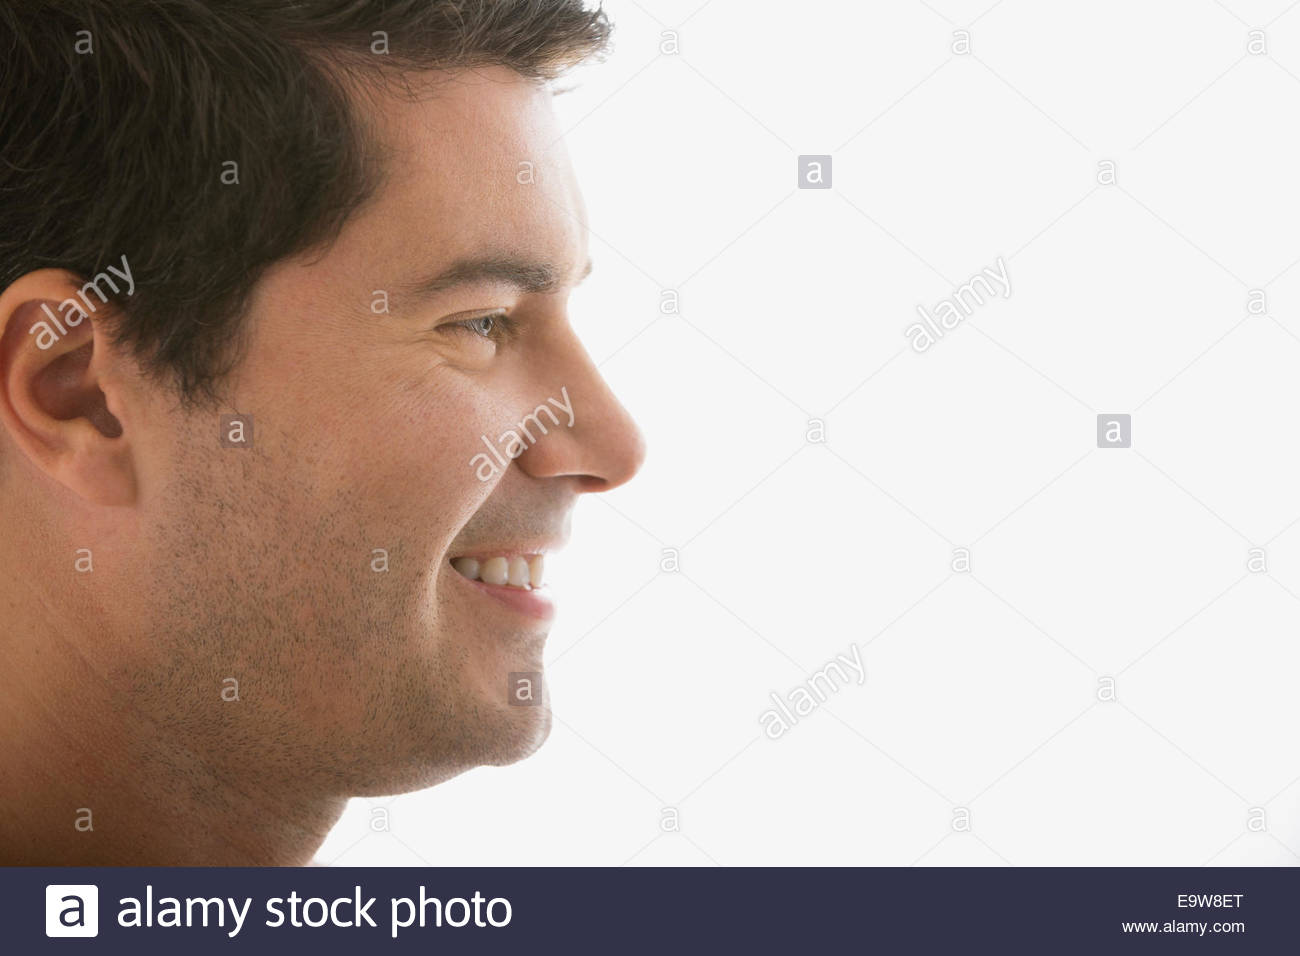 Close up profile of smiling brunette man Stock Photo